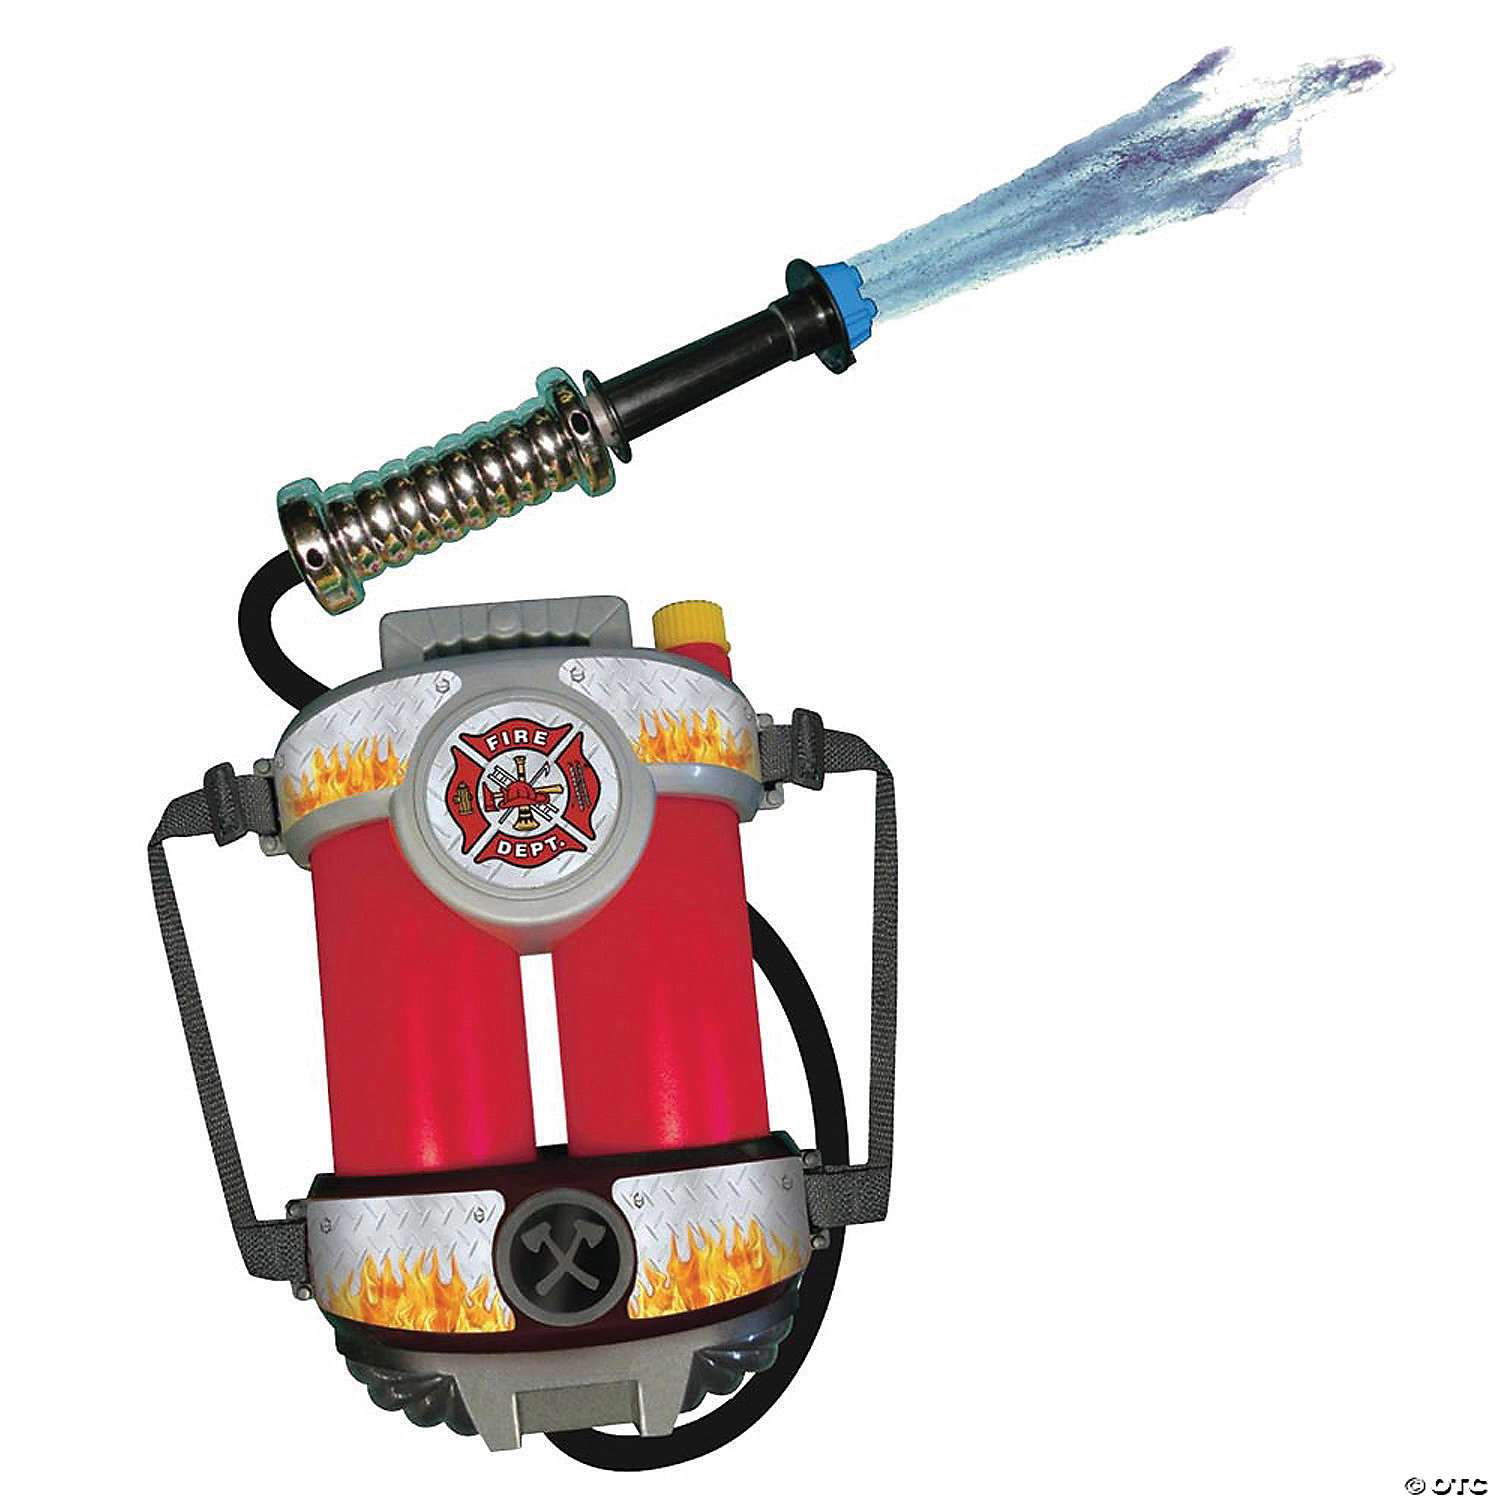 FIRE POWER SOAKER AGES 5 UP - HALLOWEEN